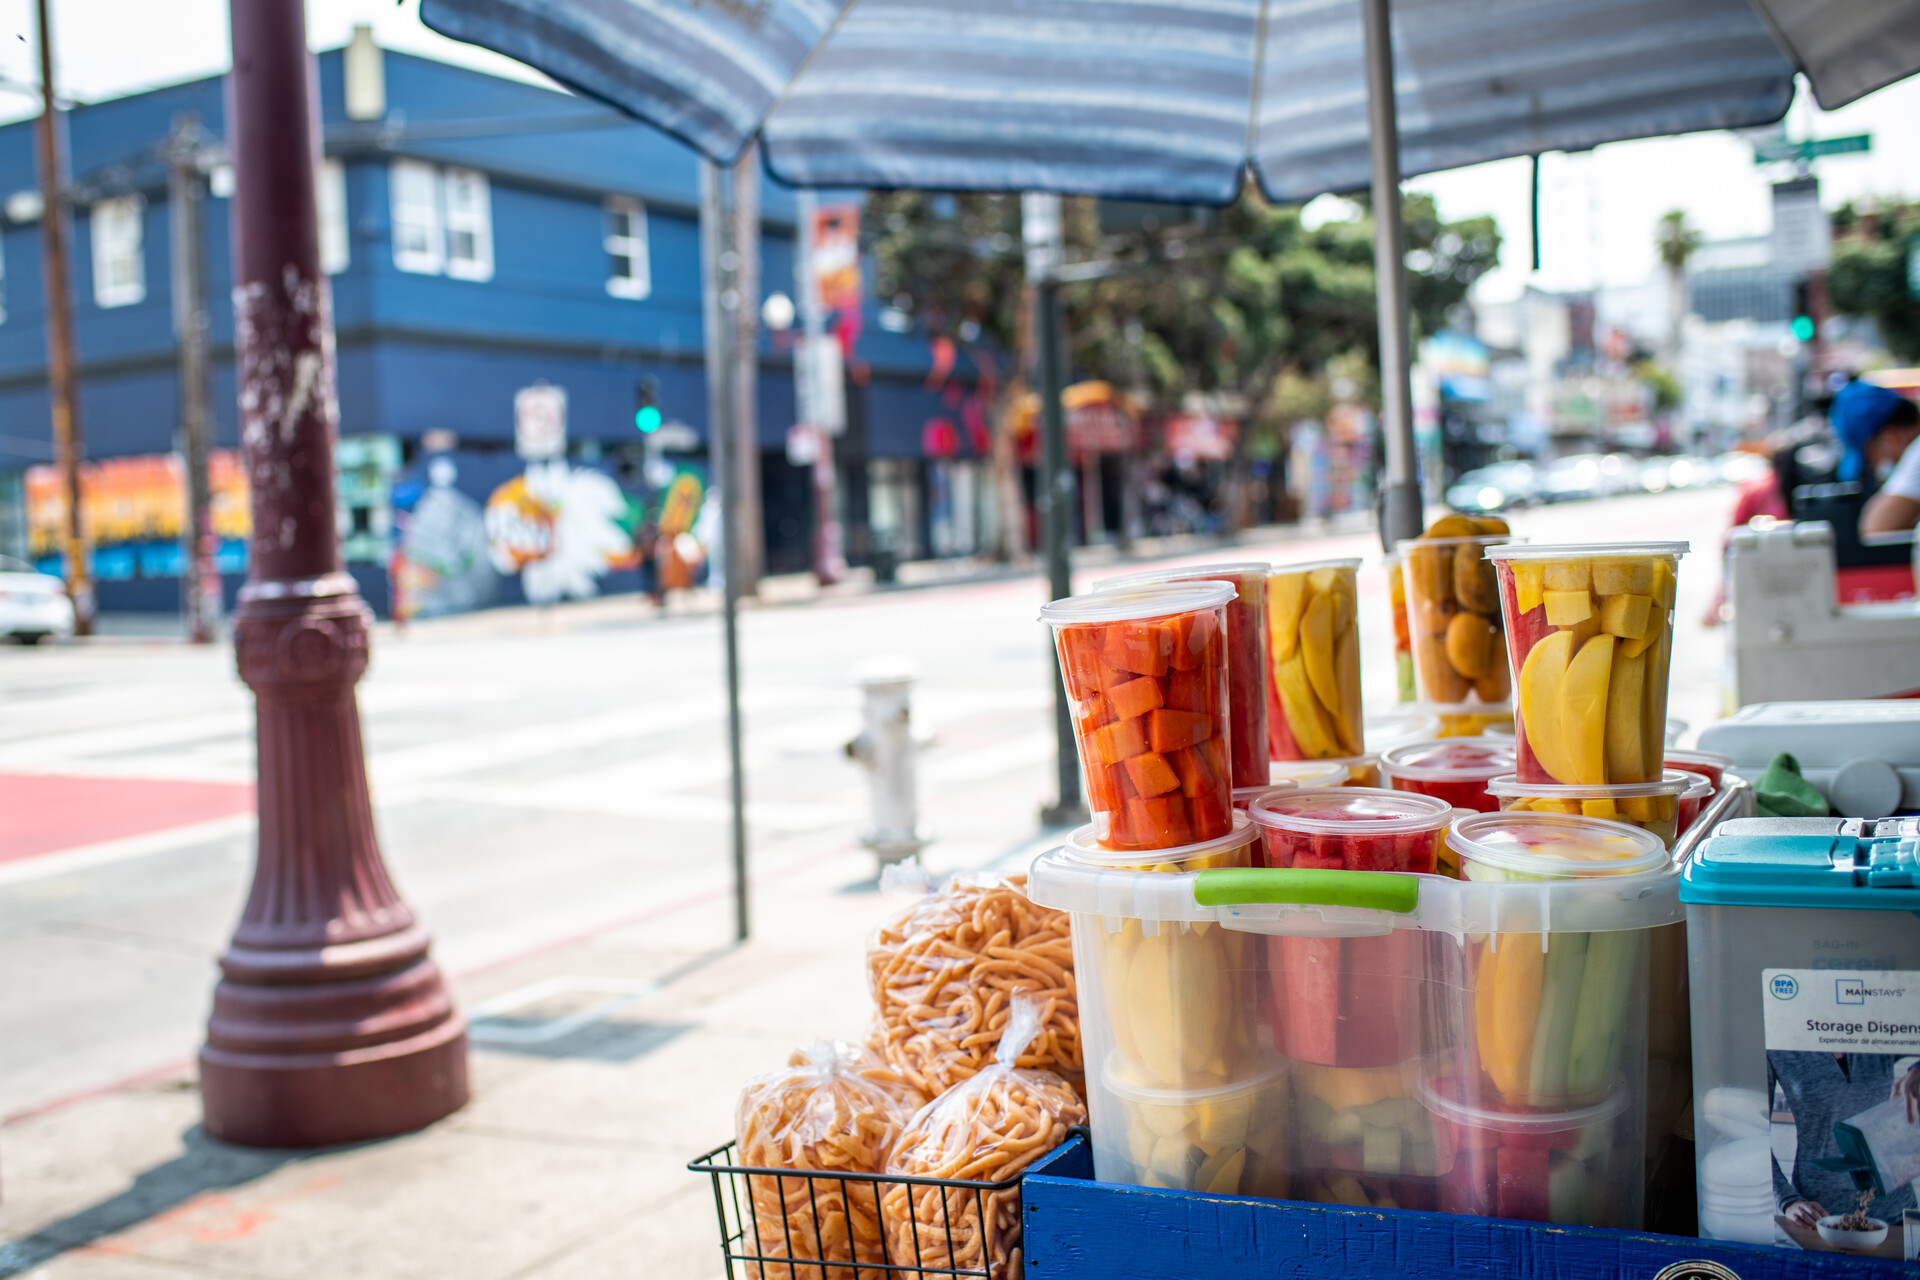 Clear plastic tubs of brightly colored fruit beneath an awning, with a city block in the background.